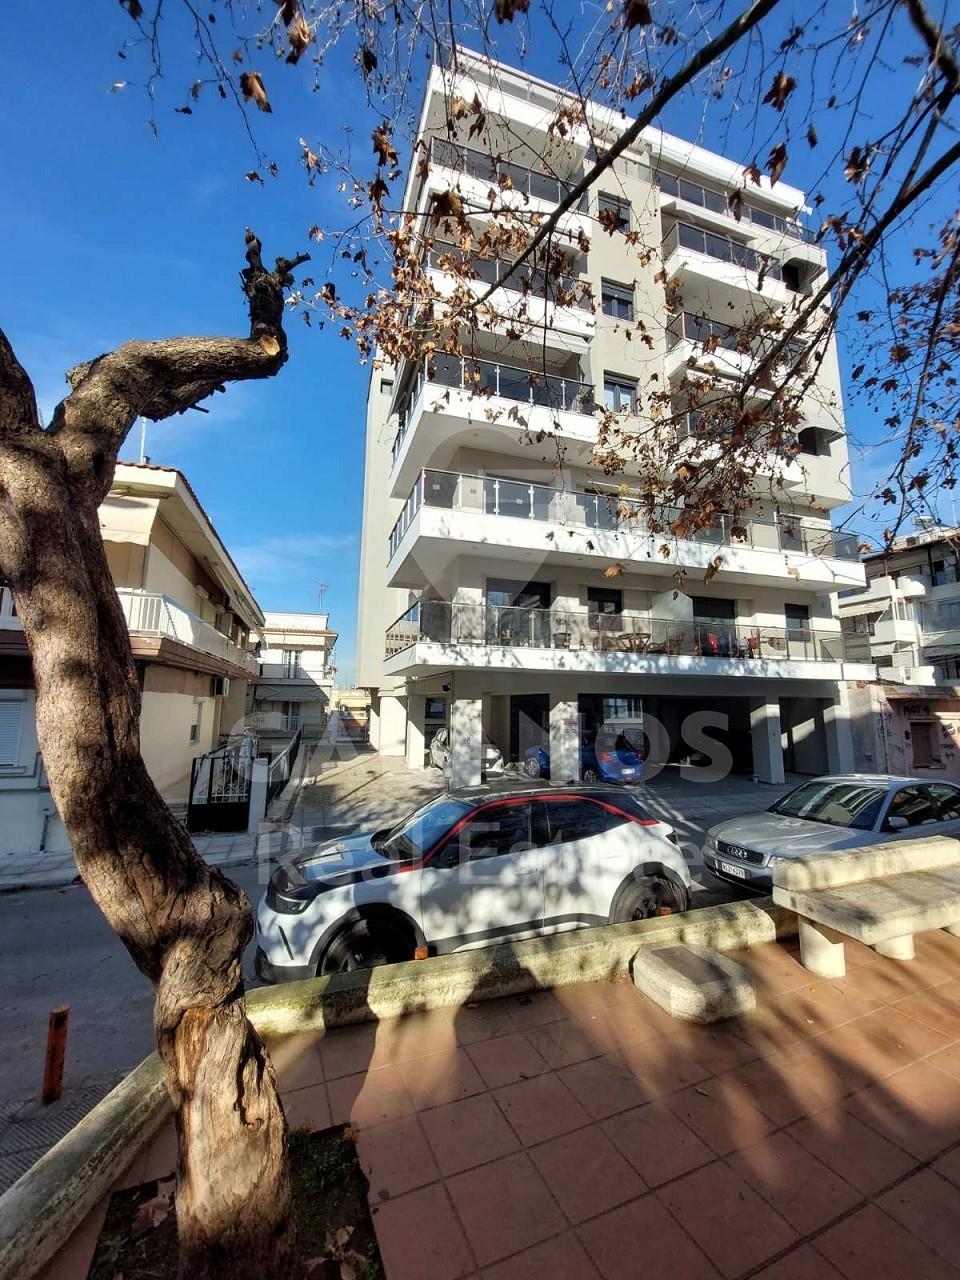 Apartment For Sale, Sykies Thessaloniki